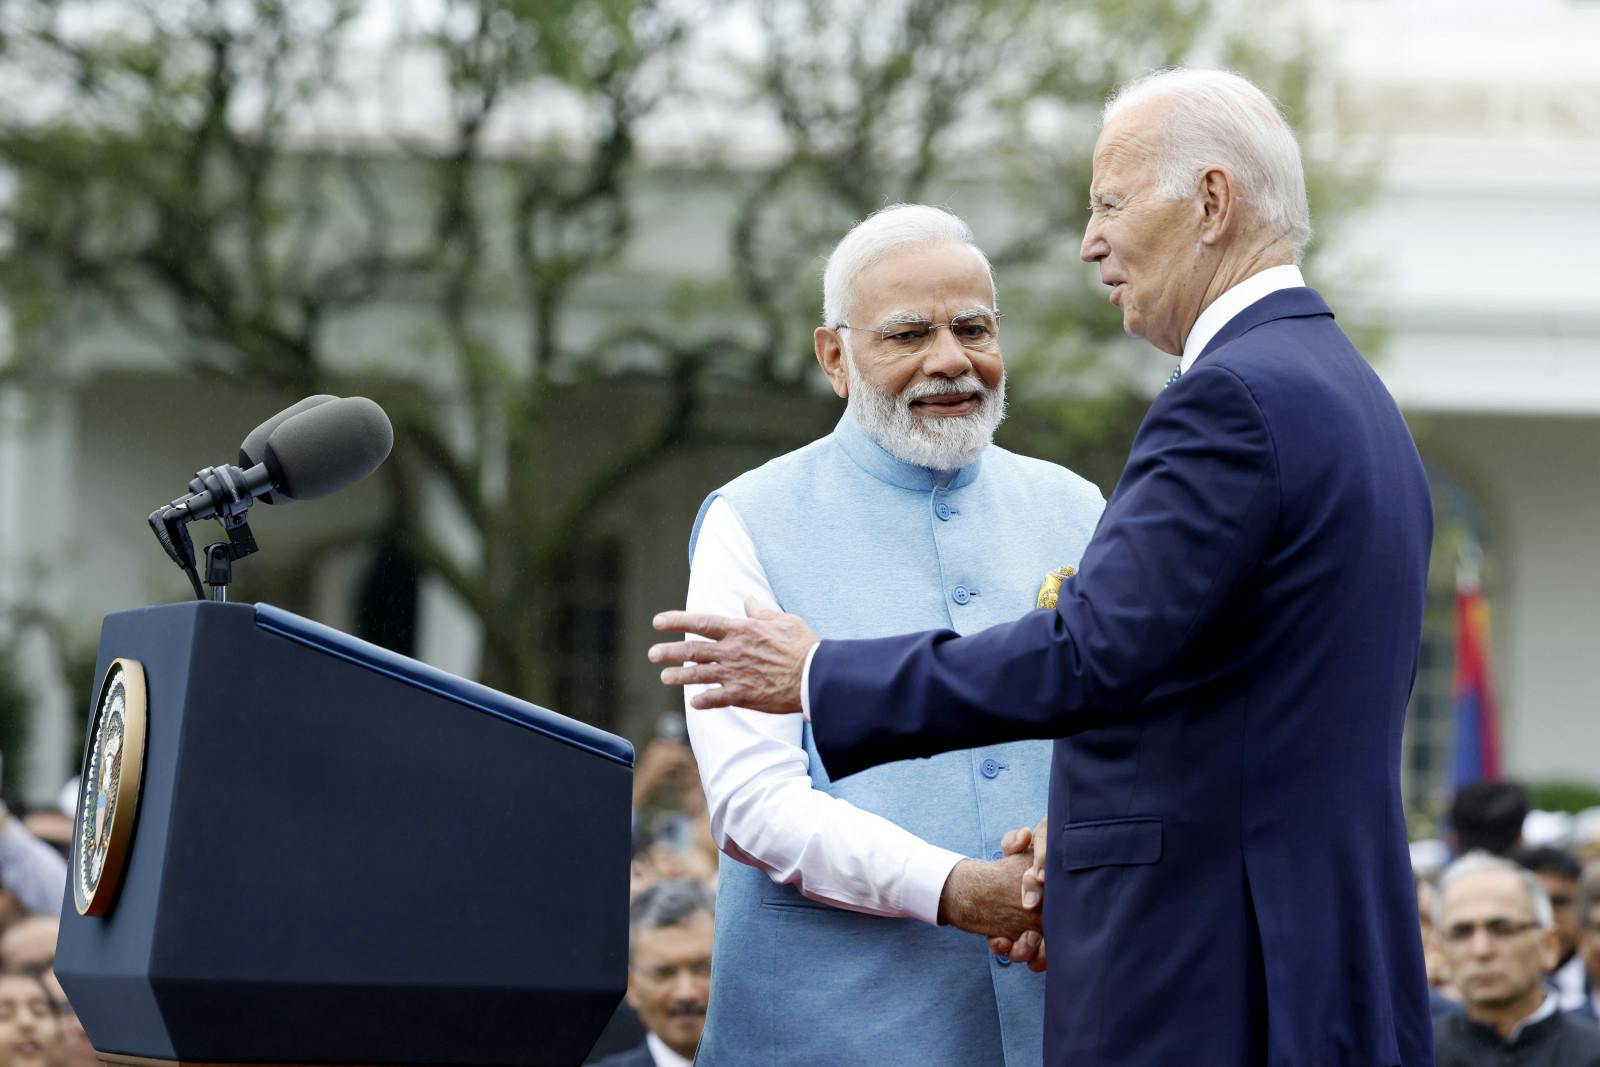 Official State Visit Of Indian Prime Minister Modi To The U.S. (Anna Moneymaker, Getty Images)